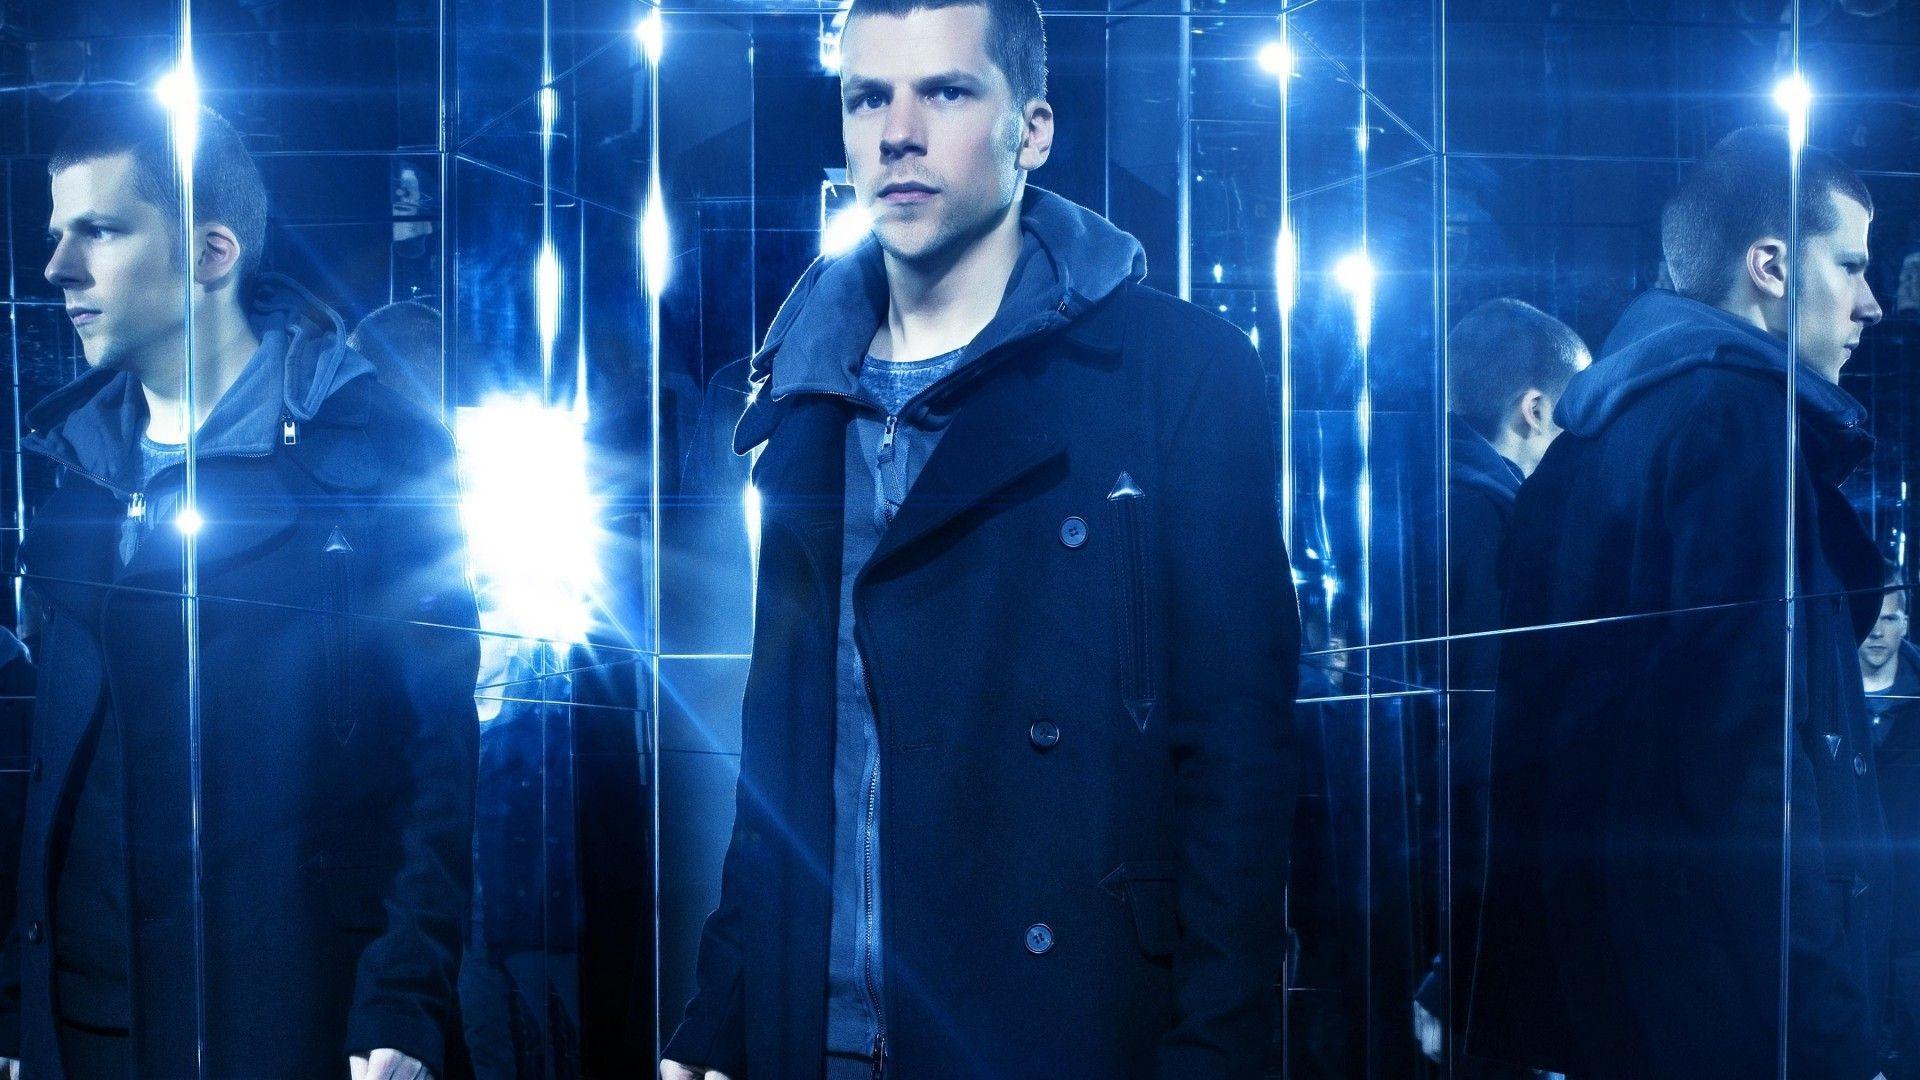 Jesse Eisenberg In Now You See Me 2 Wallpaper 01929